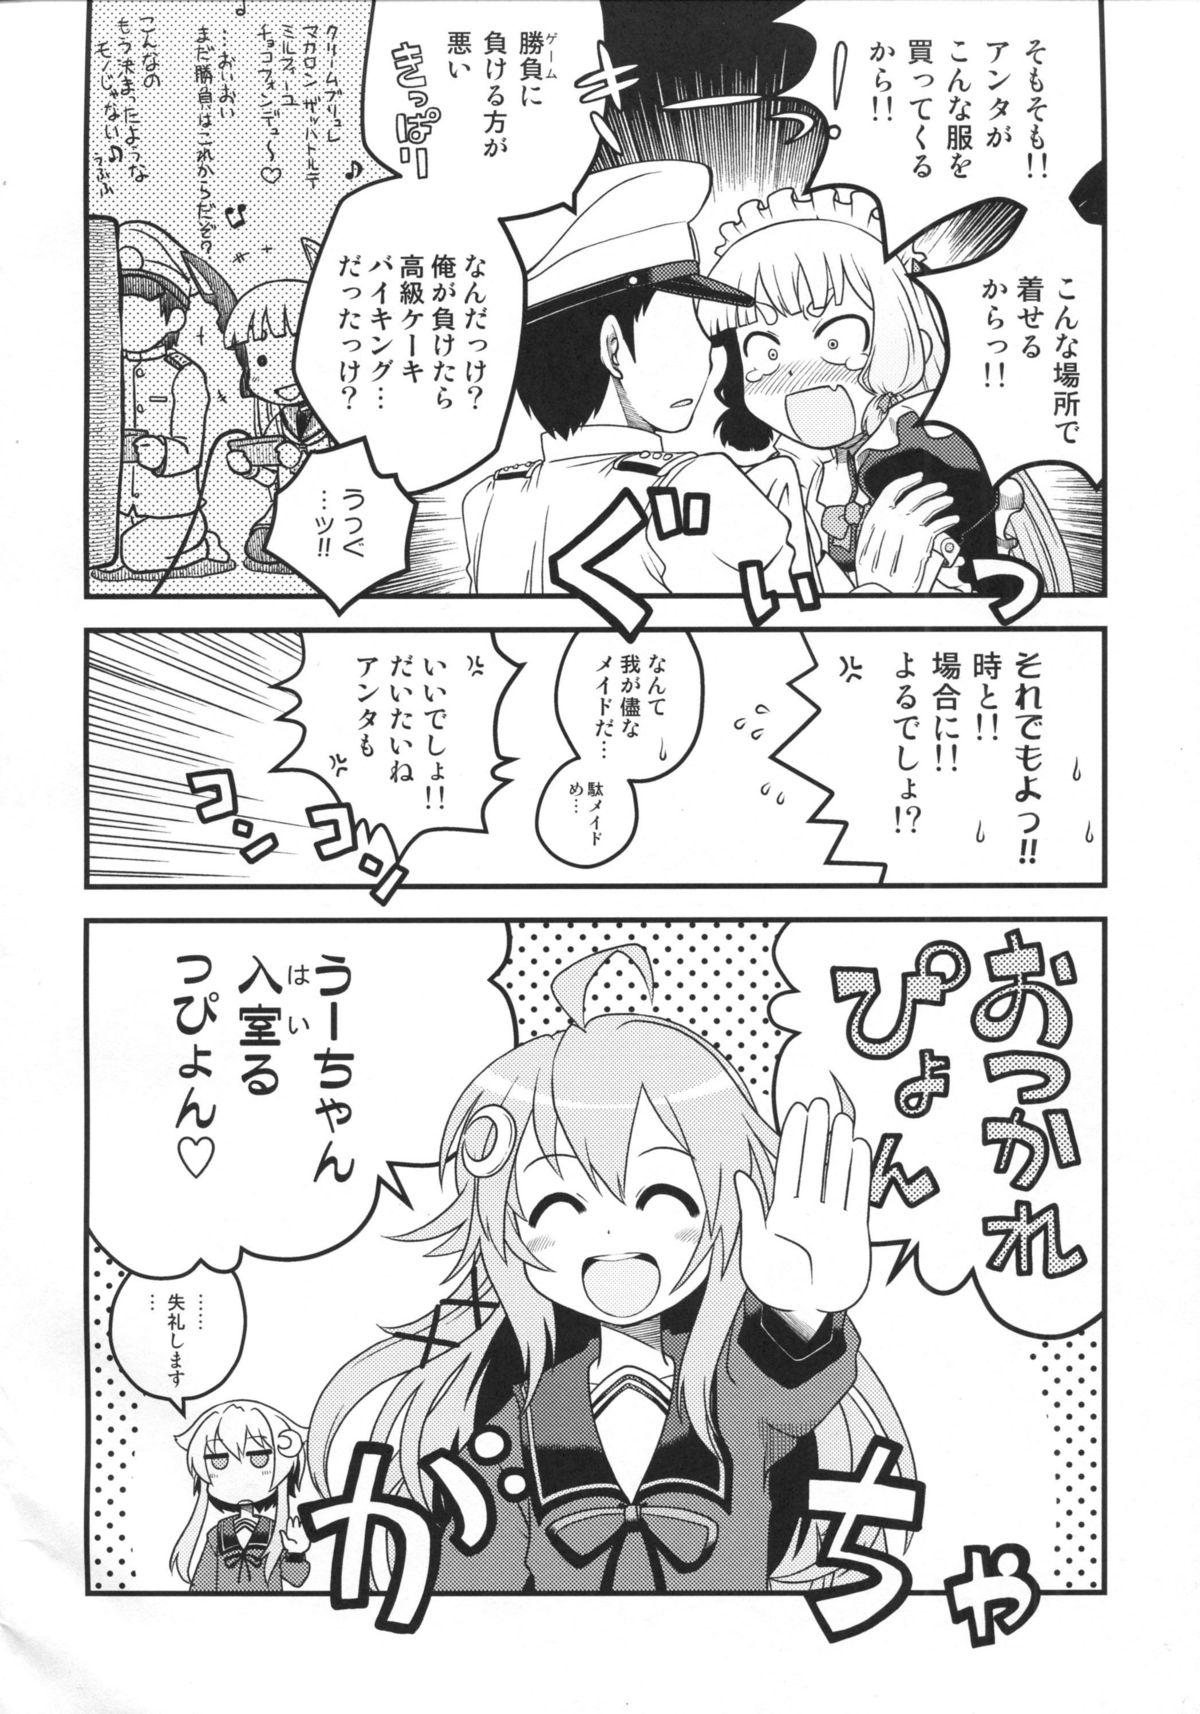 Gay Friend Maid in Murakumo - Kantai collection Scandal - Page 5